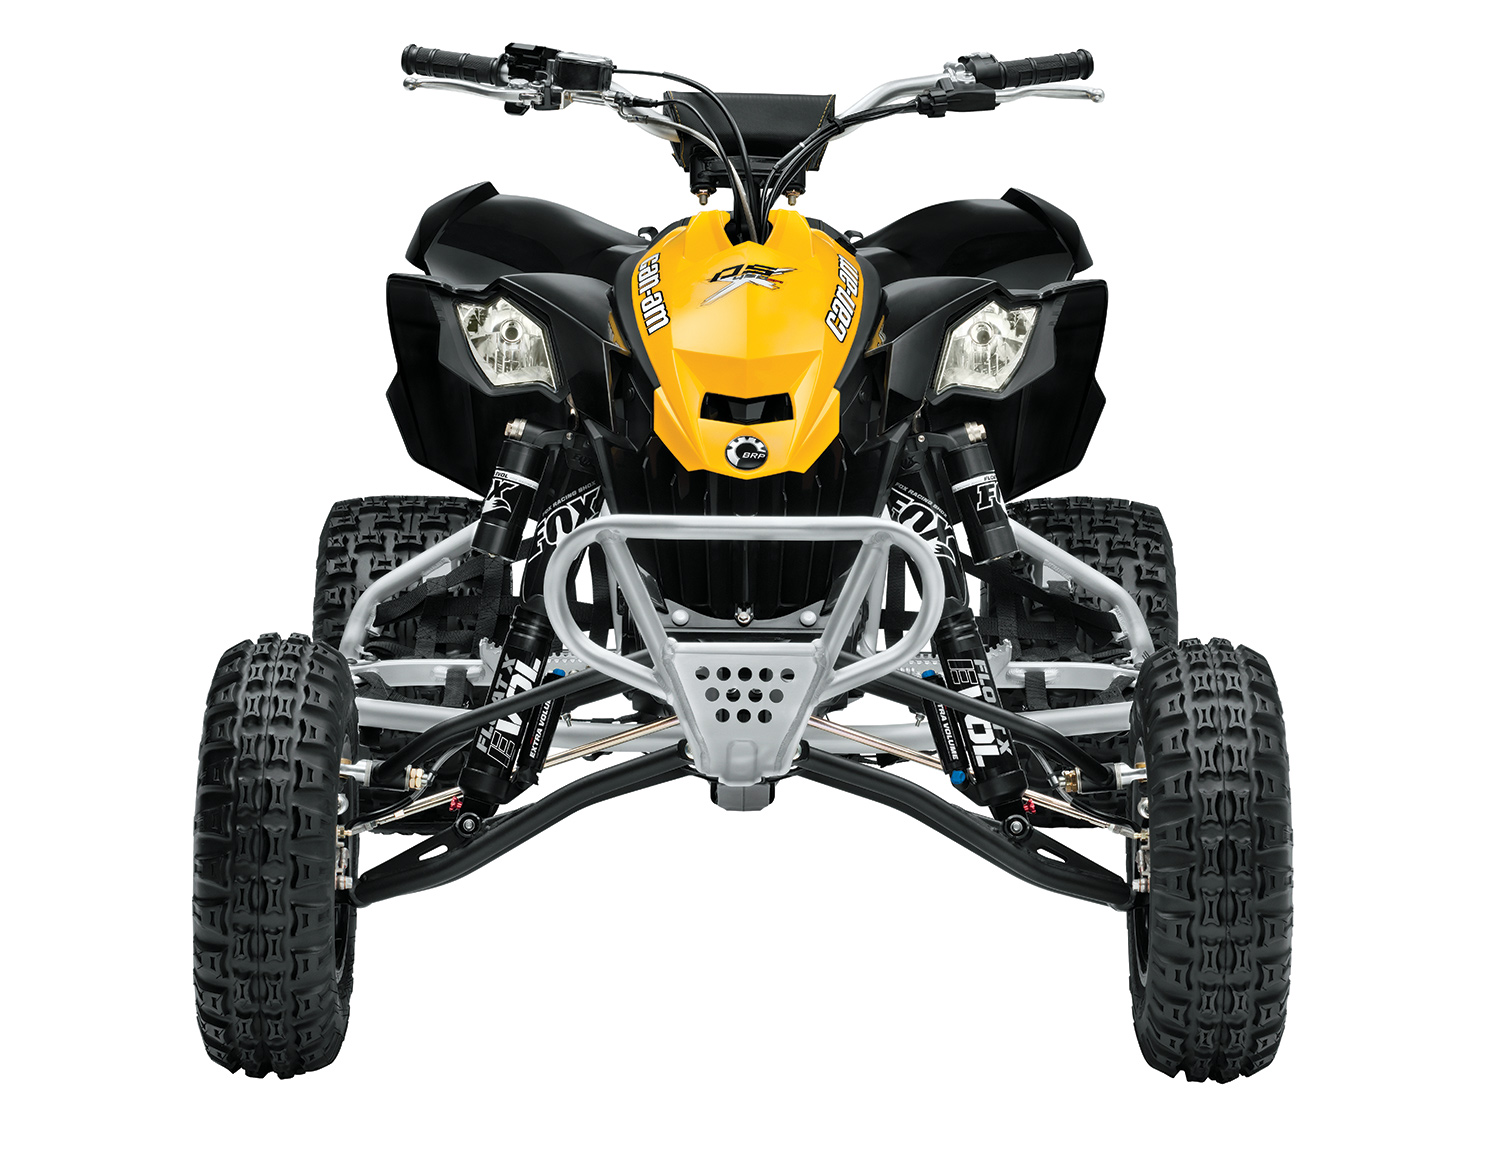  CAN-AM DS 450 XMX v 2014  2 